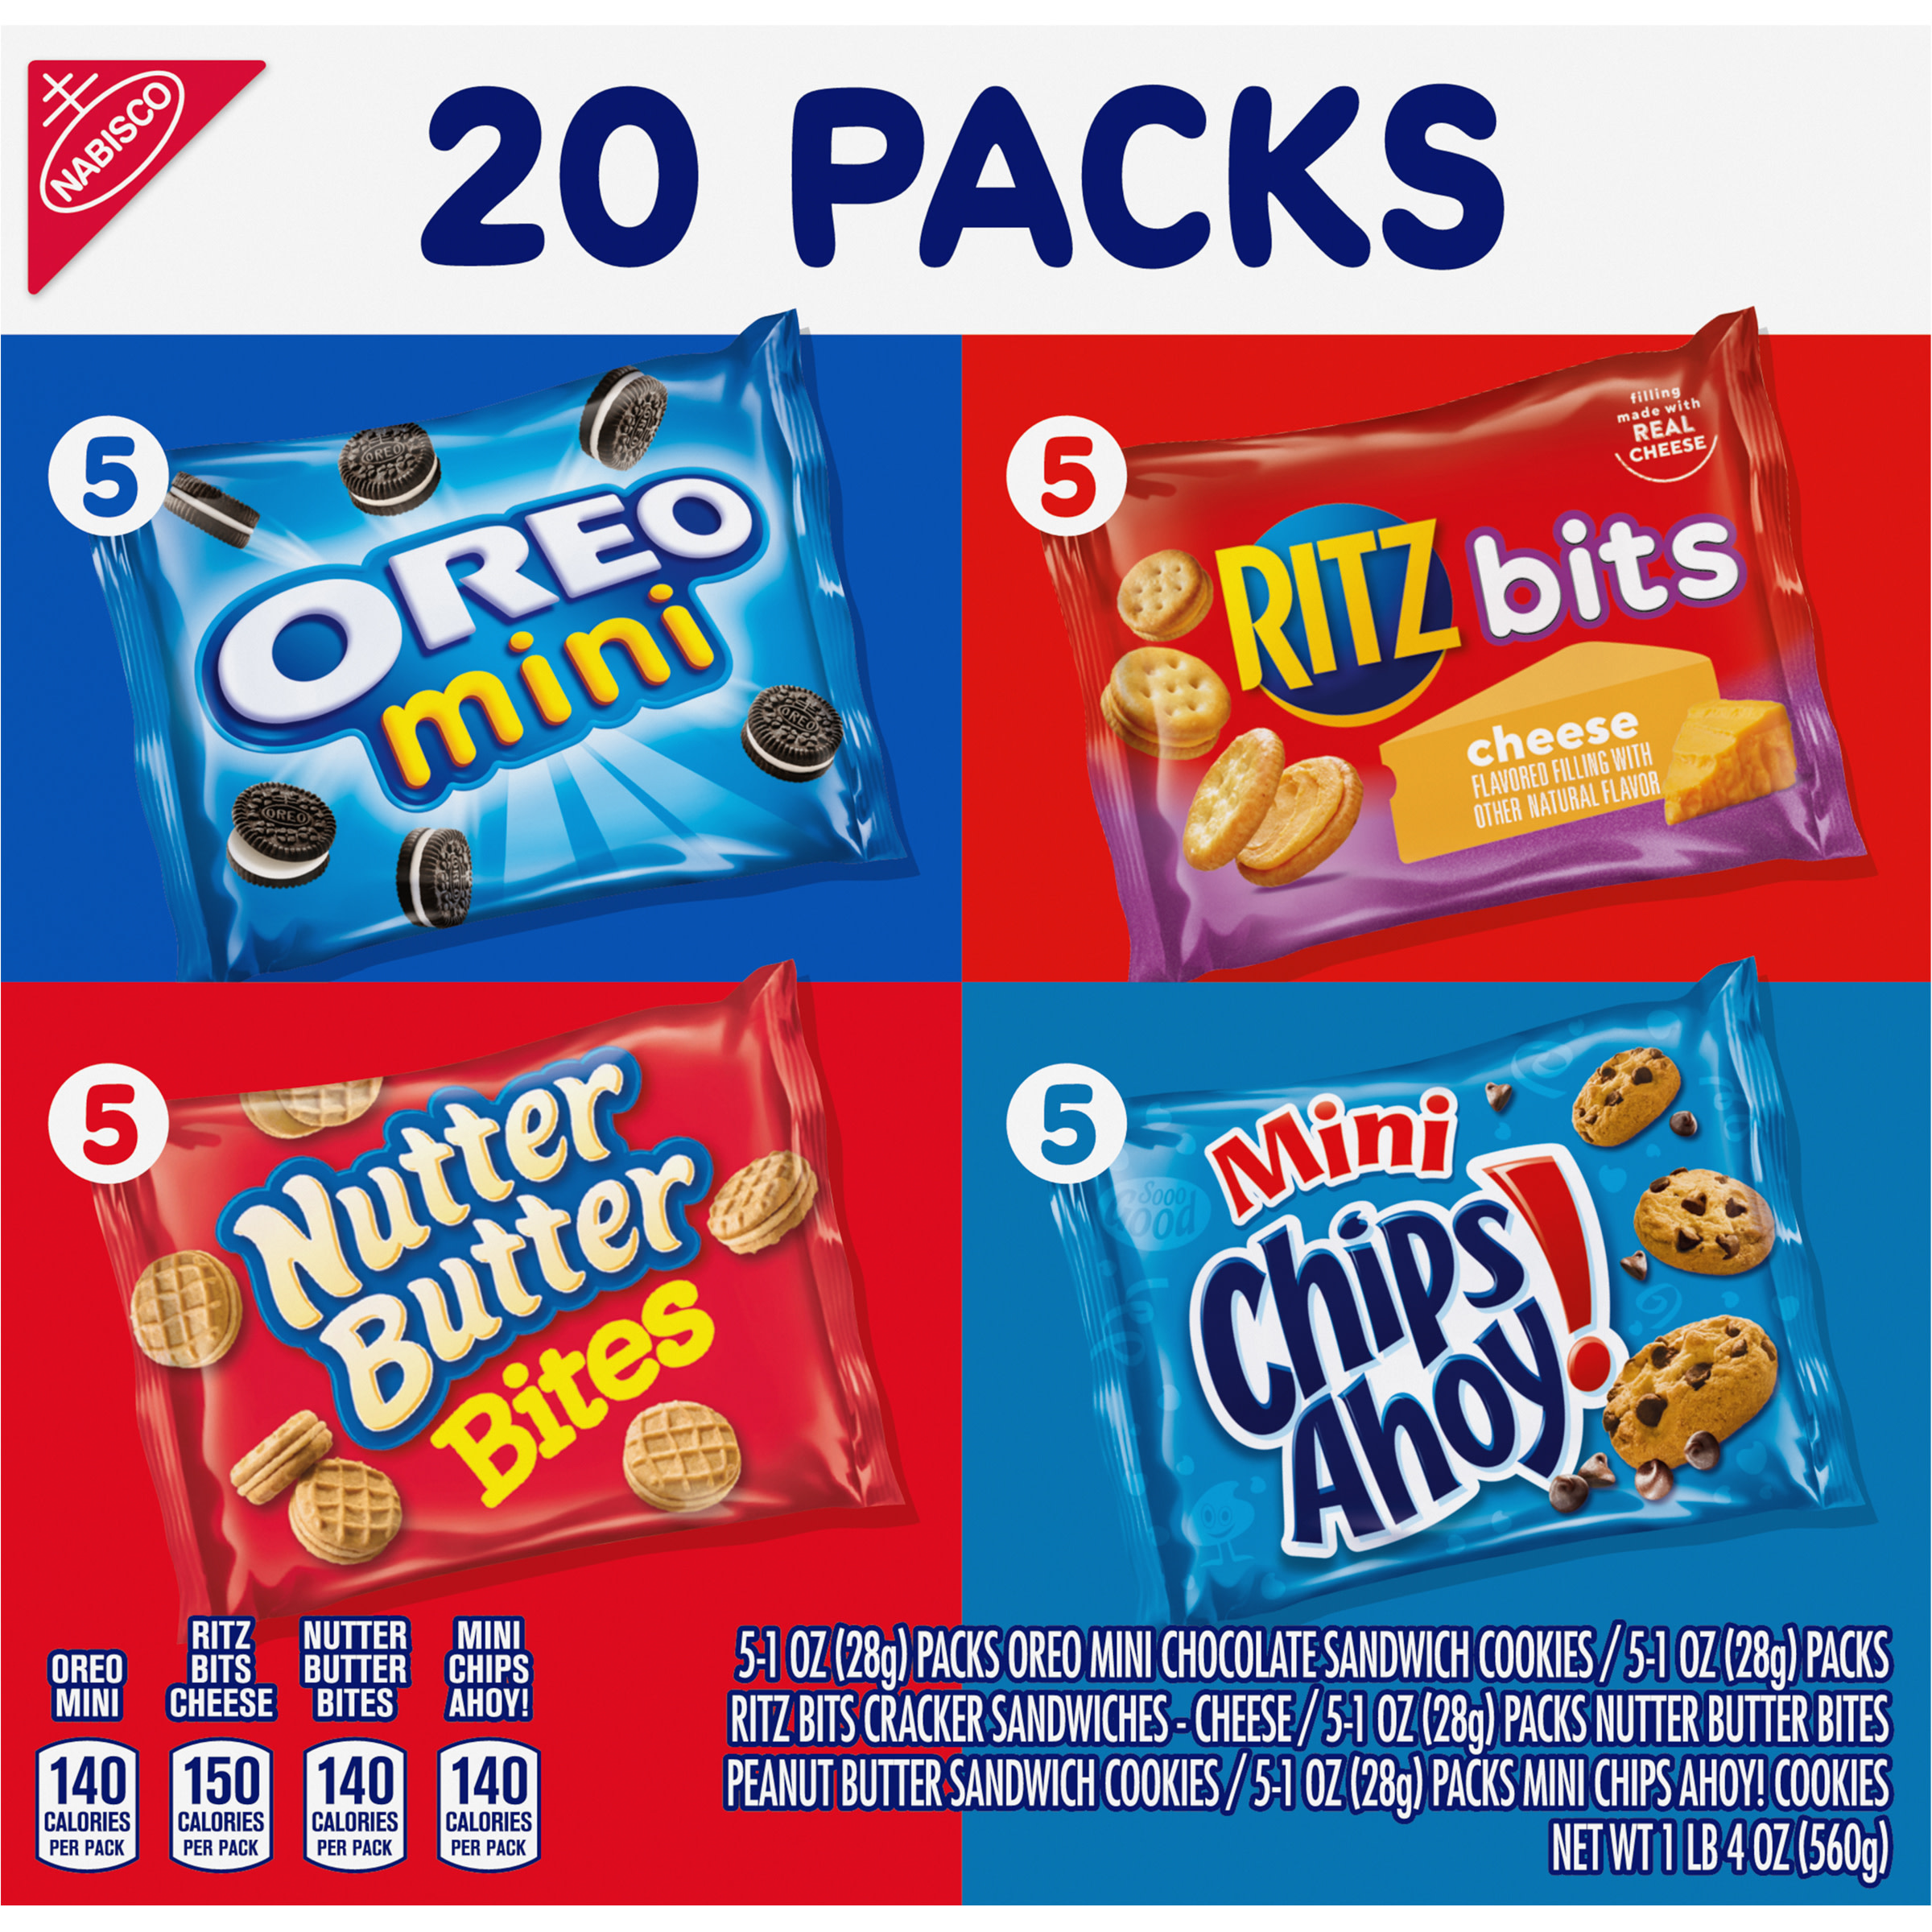 Nabisco Classic Mix Variety Pack, OREO Mini, CHIPS AHOY! Mini, Nutter Butter Bites, RITZ Bits Cheese, Easter Snacks, 20 Snack Packs - image 11 of 12